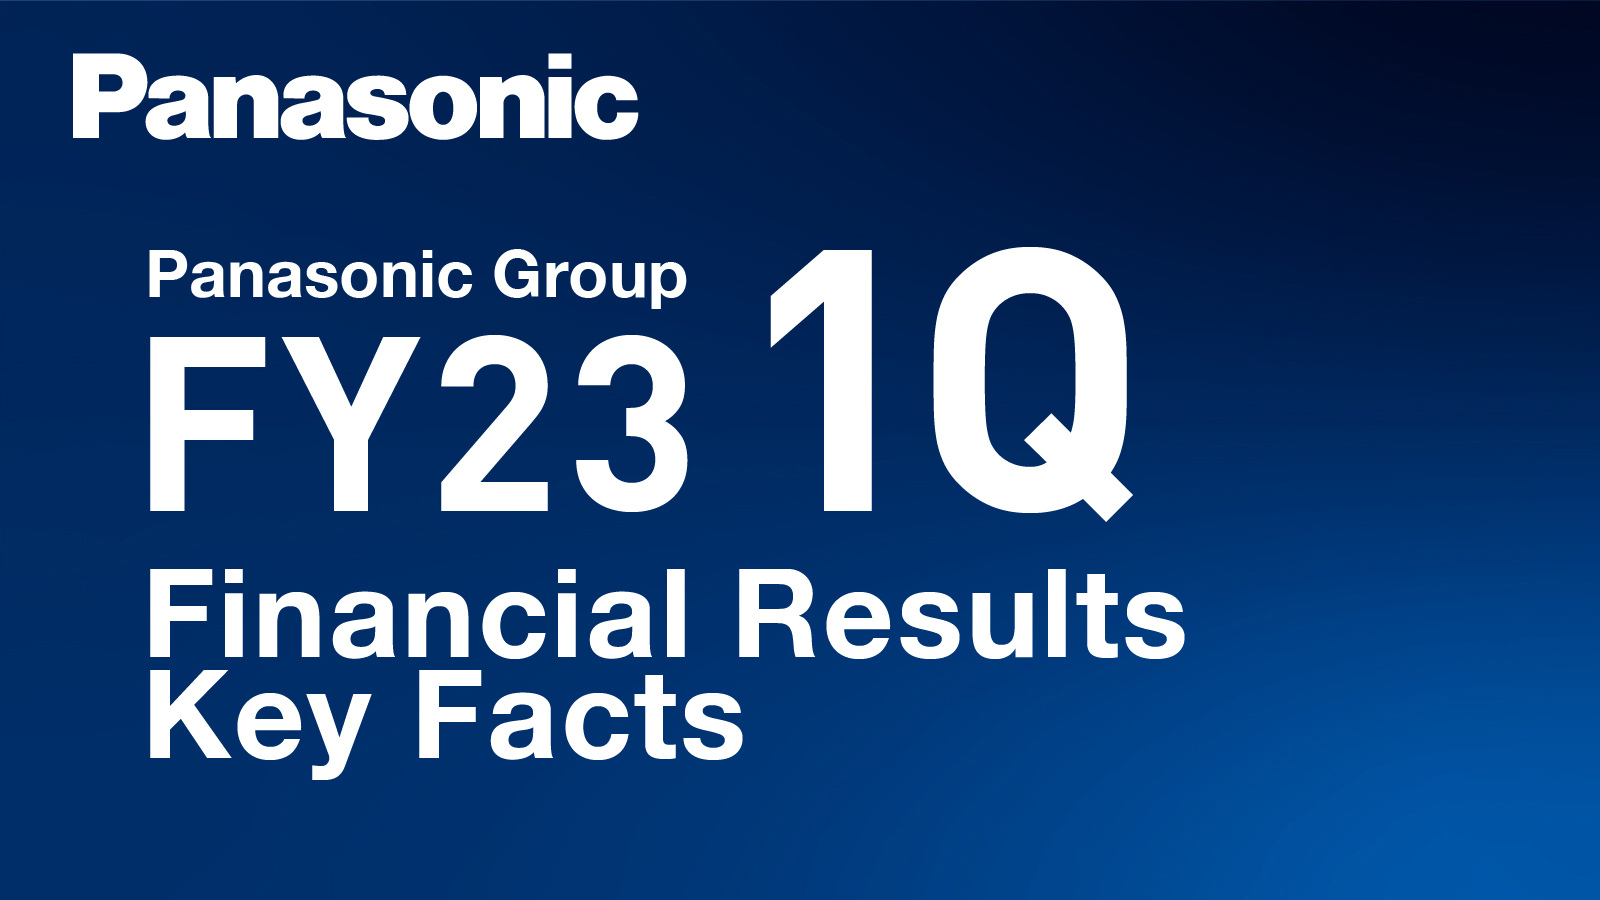 Image: Panasonic Group FY23 1Q Financial Results Key Facts